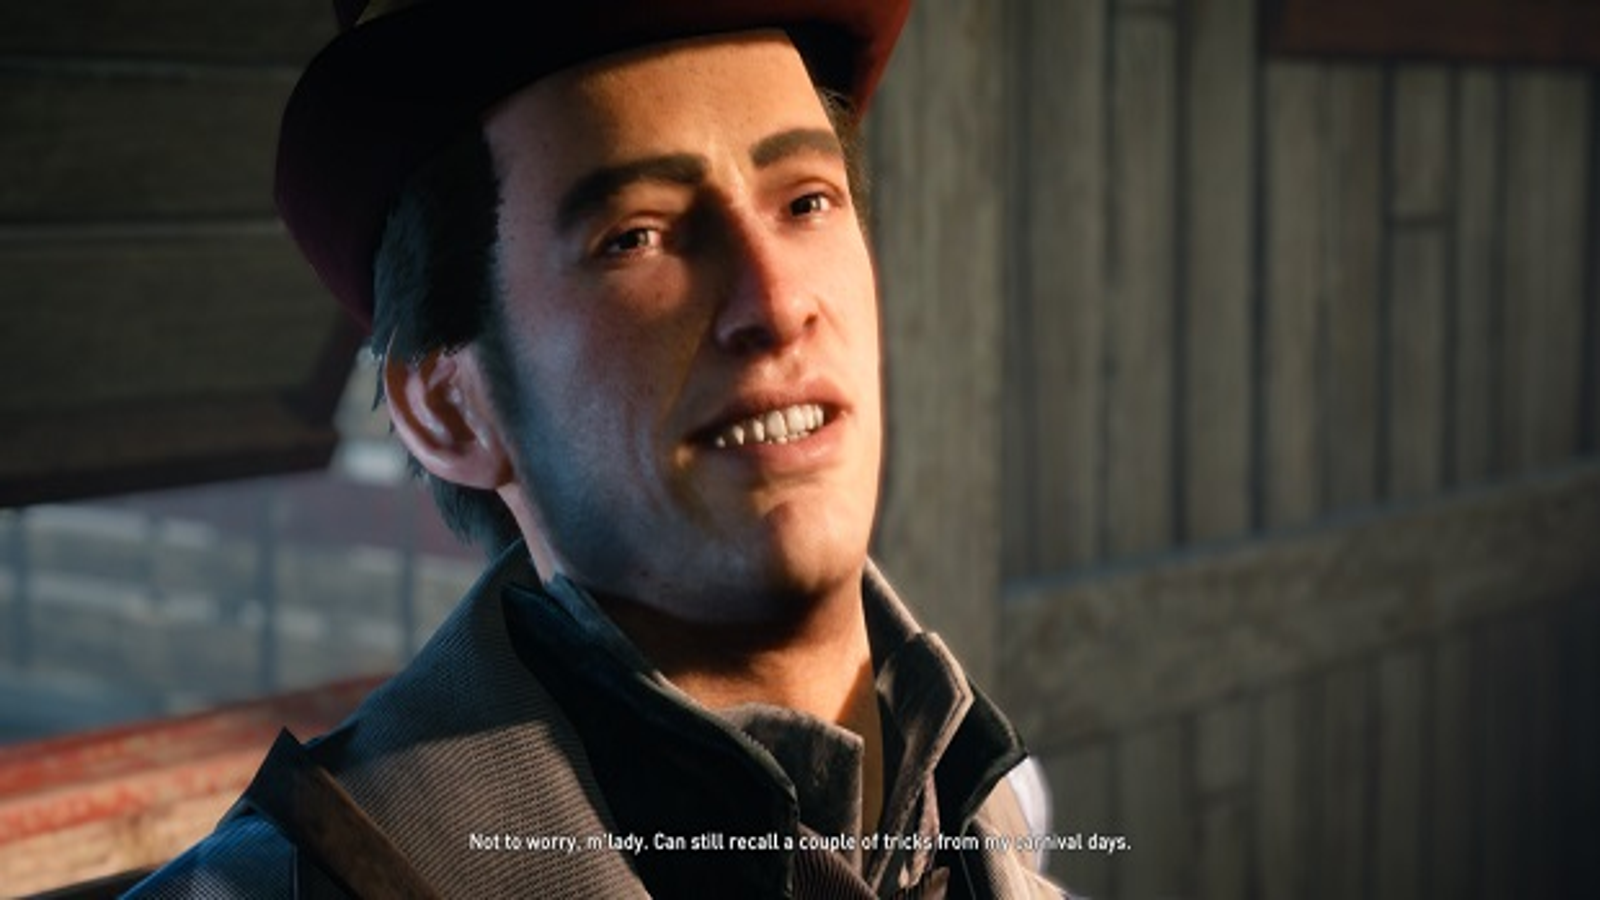 Assassin's Creed Syndicate is everything that's great and terrible